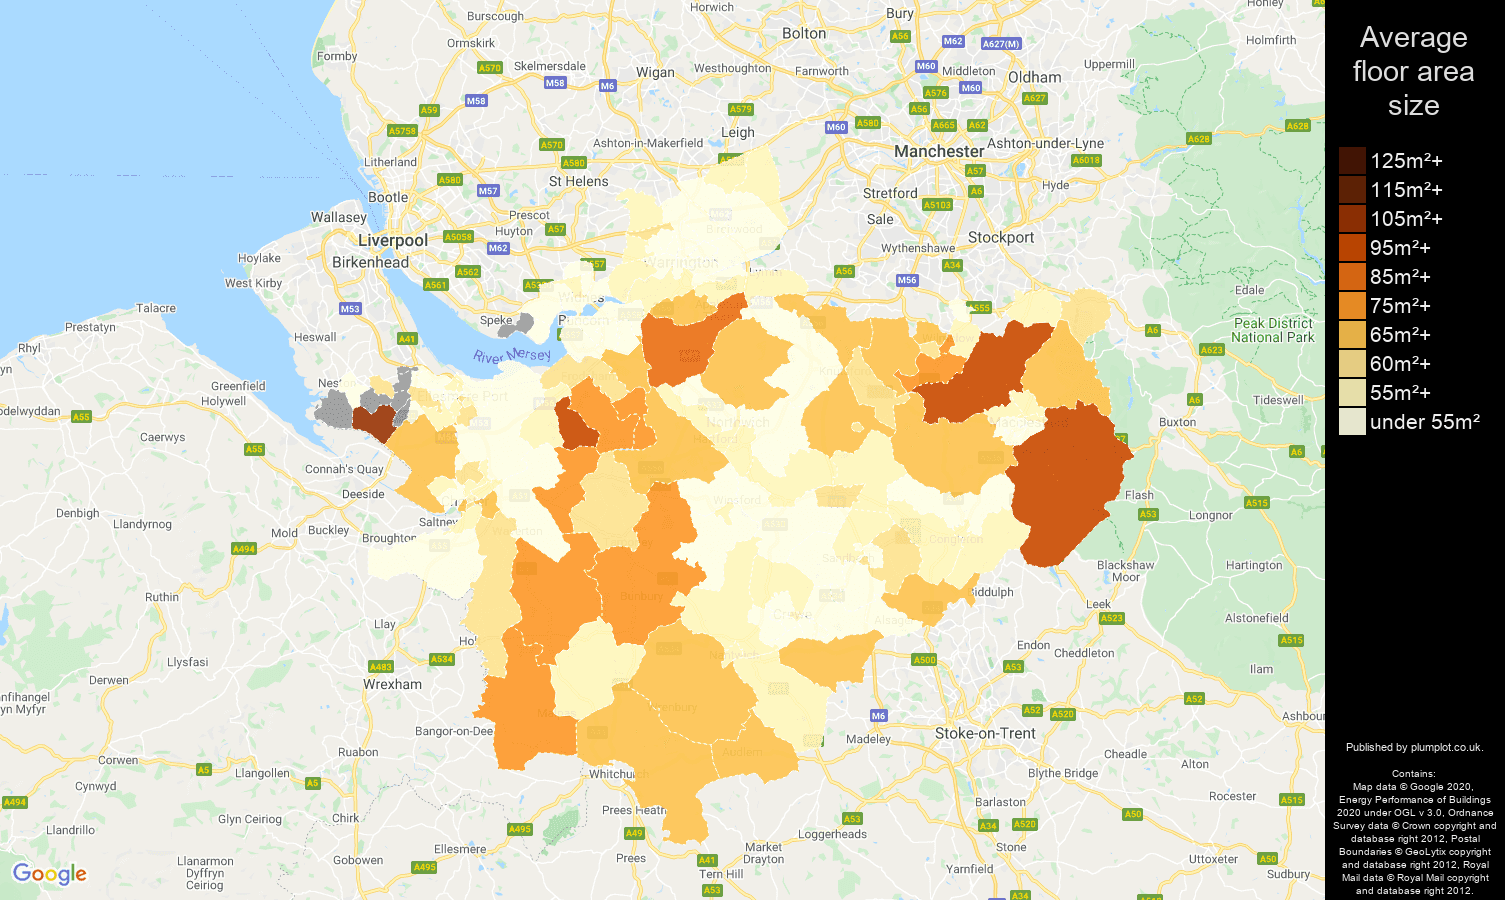 Cheshire map of average floor area size of flats